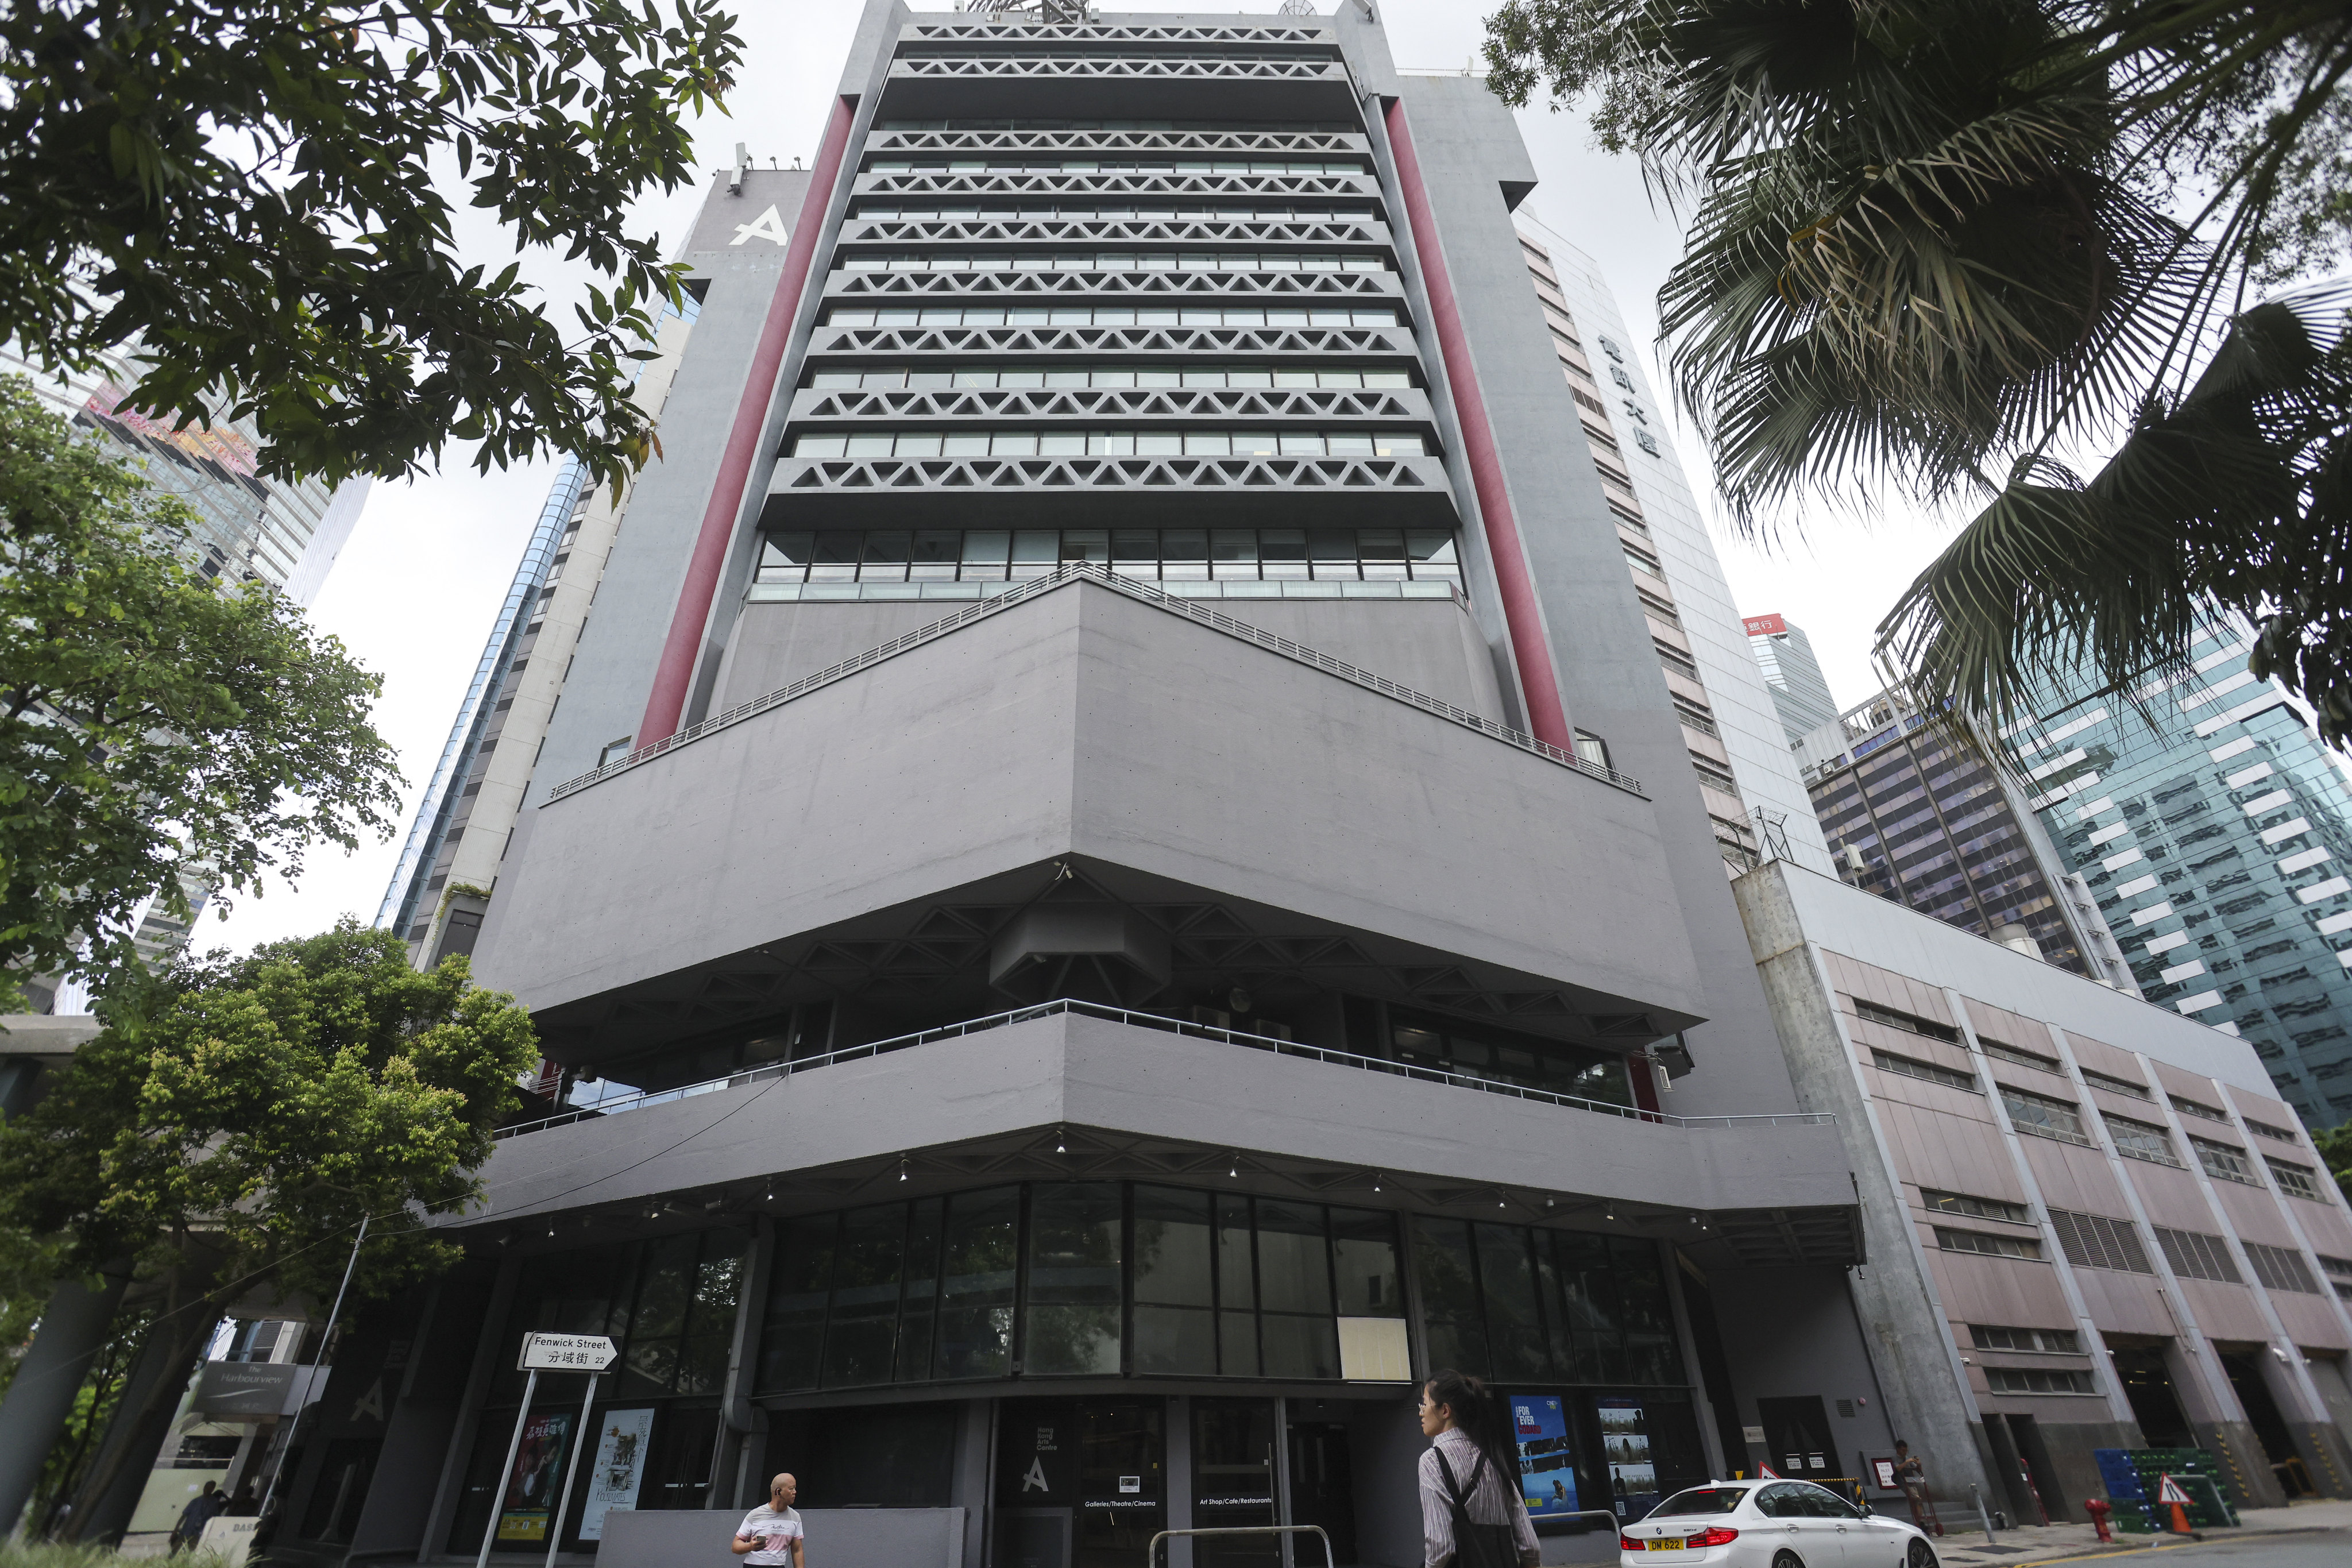 The Hong Kong Arts Centre in Wanchai. The centre has seen an exodus of staff over the last year, according to former employees, amid accusations of self-censorship. Photo: Jonathan Wong